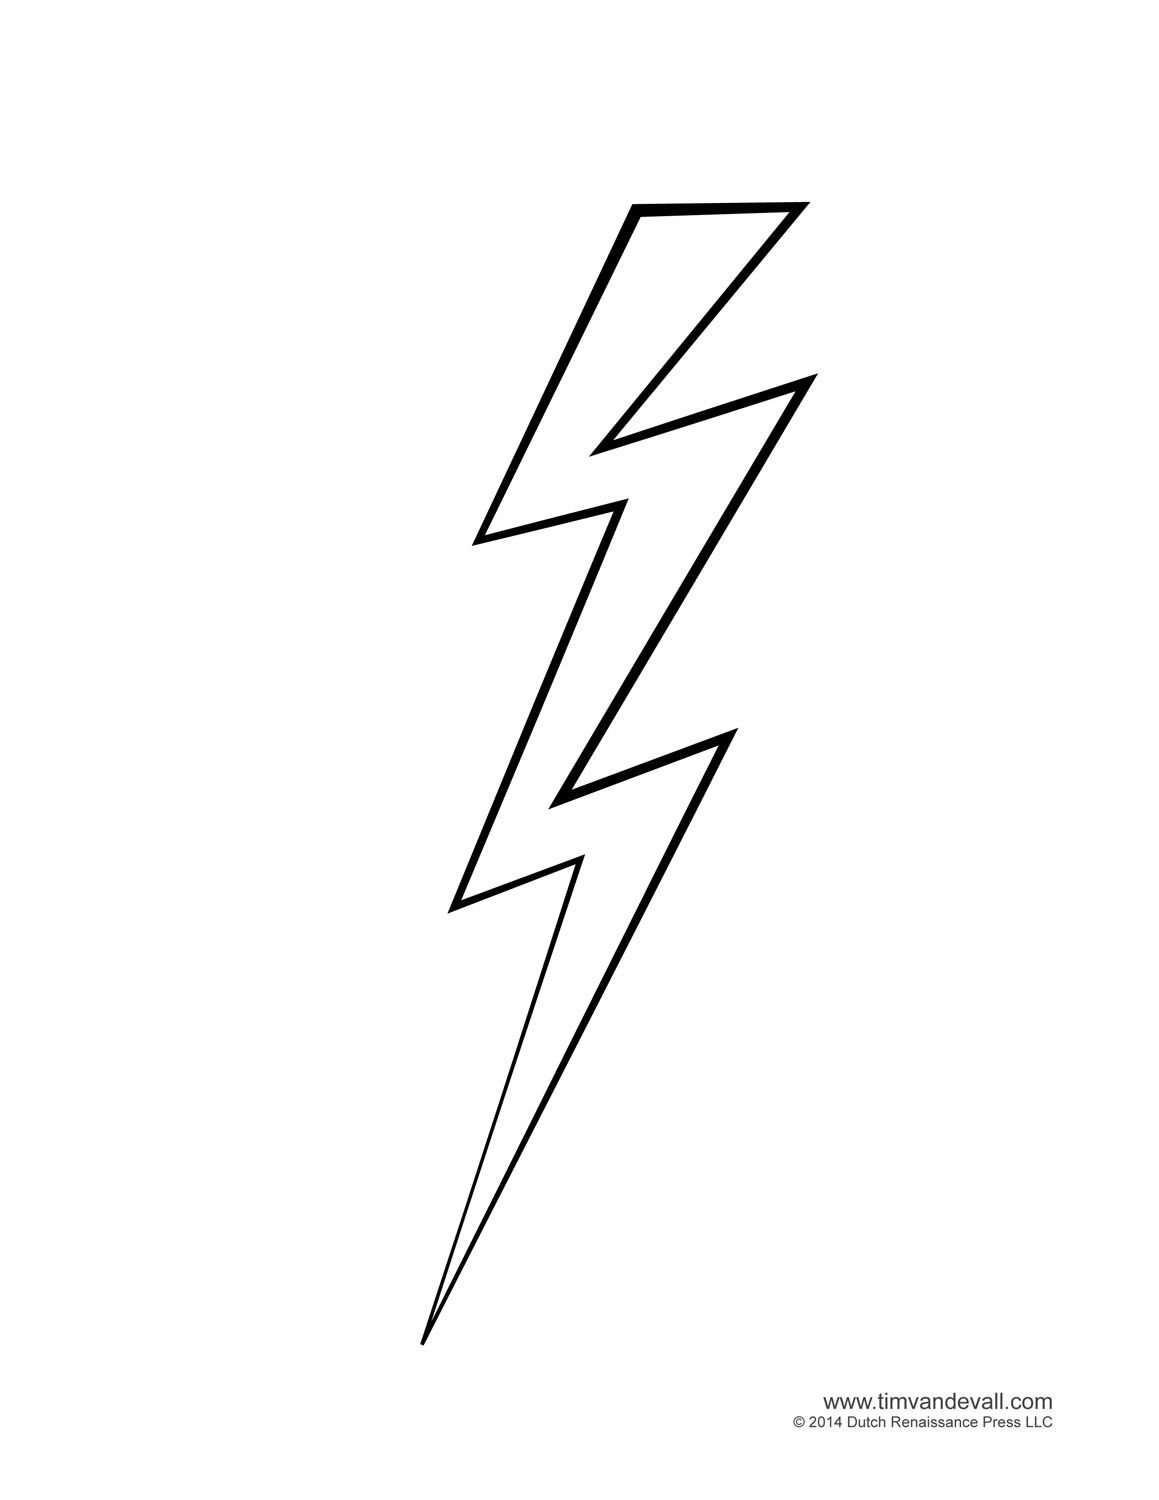 Lightning Bolt Weather For Kids Free Cloud Templates And Weather Coloring Pages Clip Art Pictures Of Lightning Bolts Lightning Bolt Coloring Pages